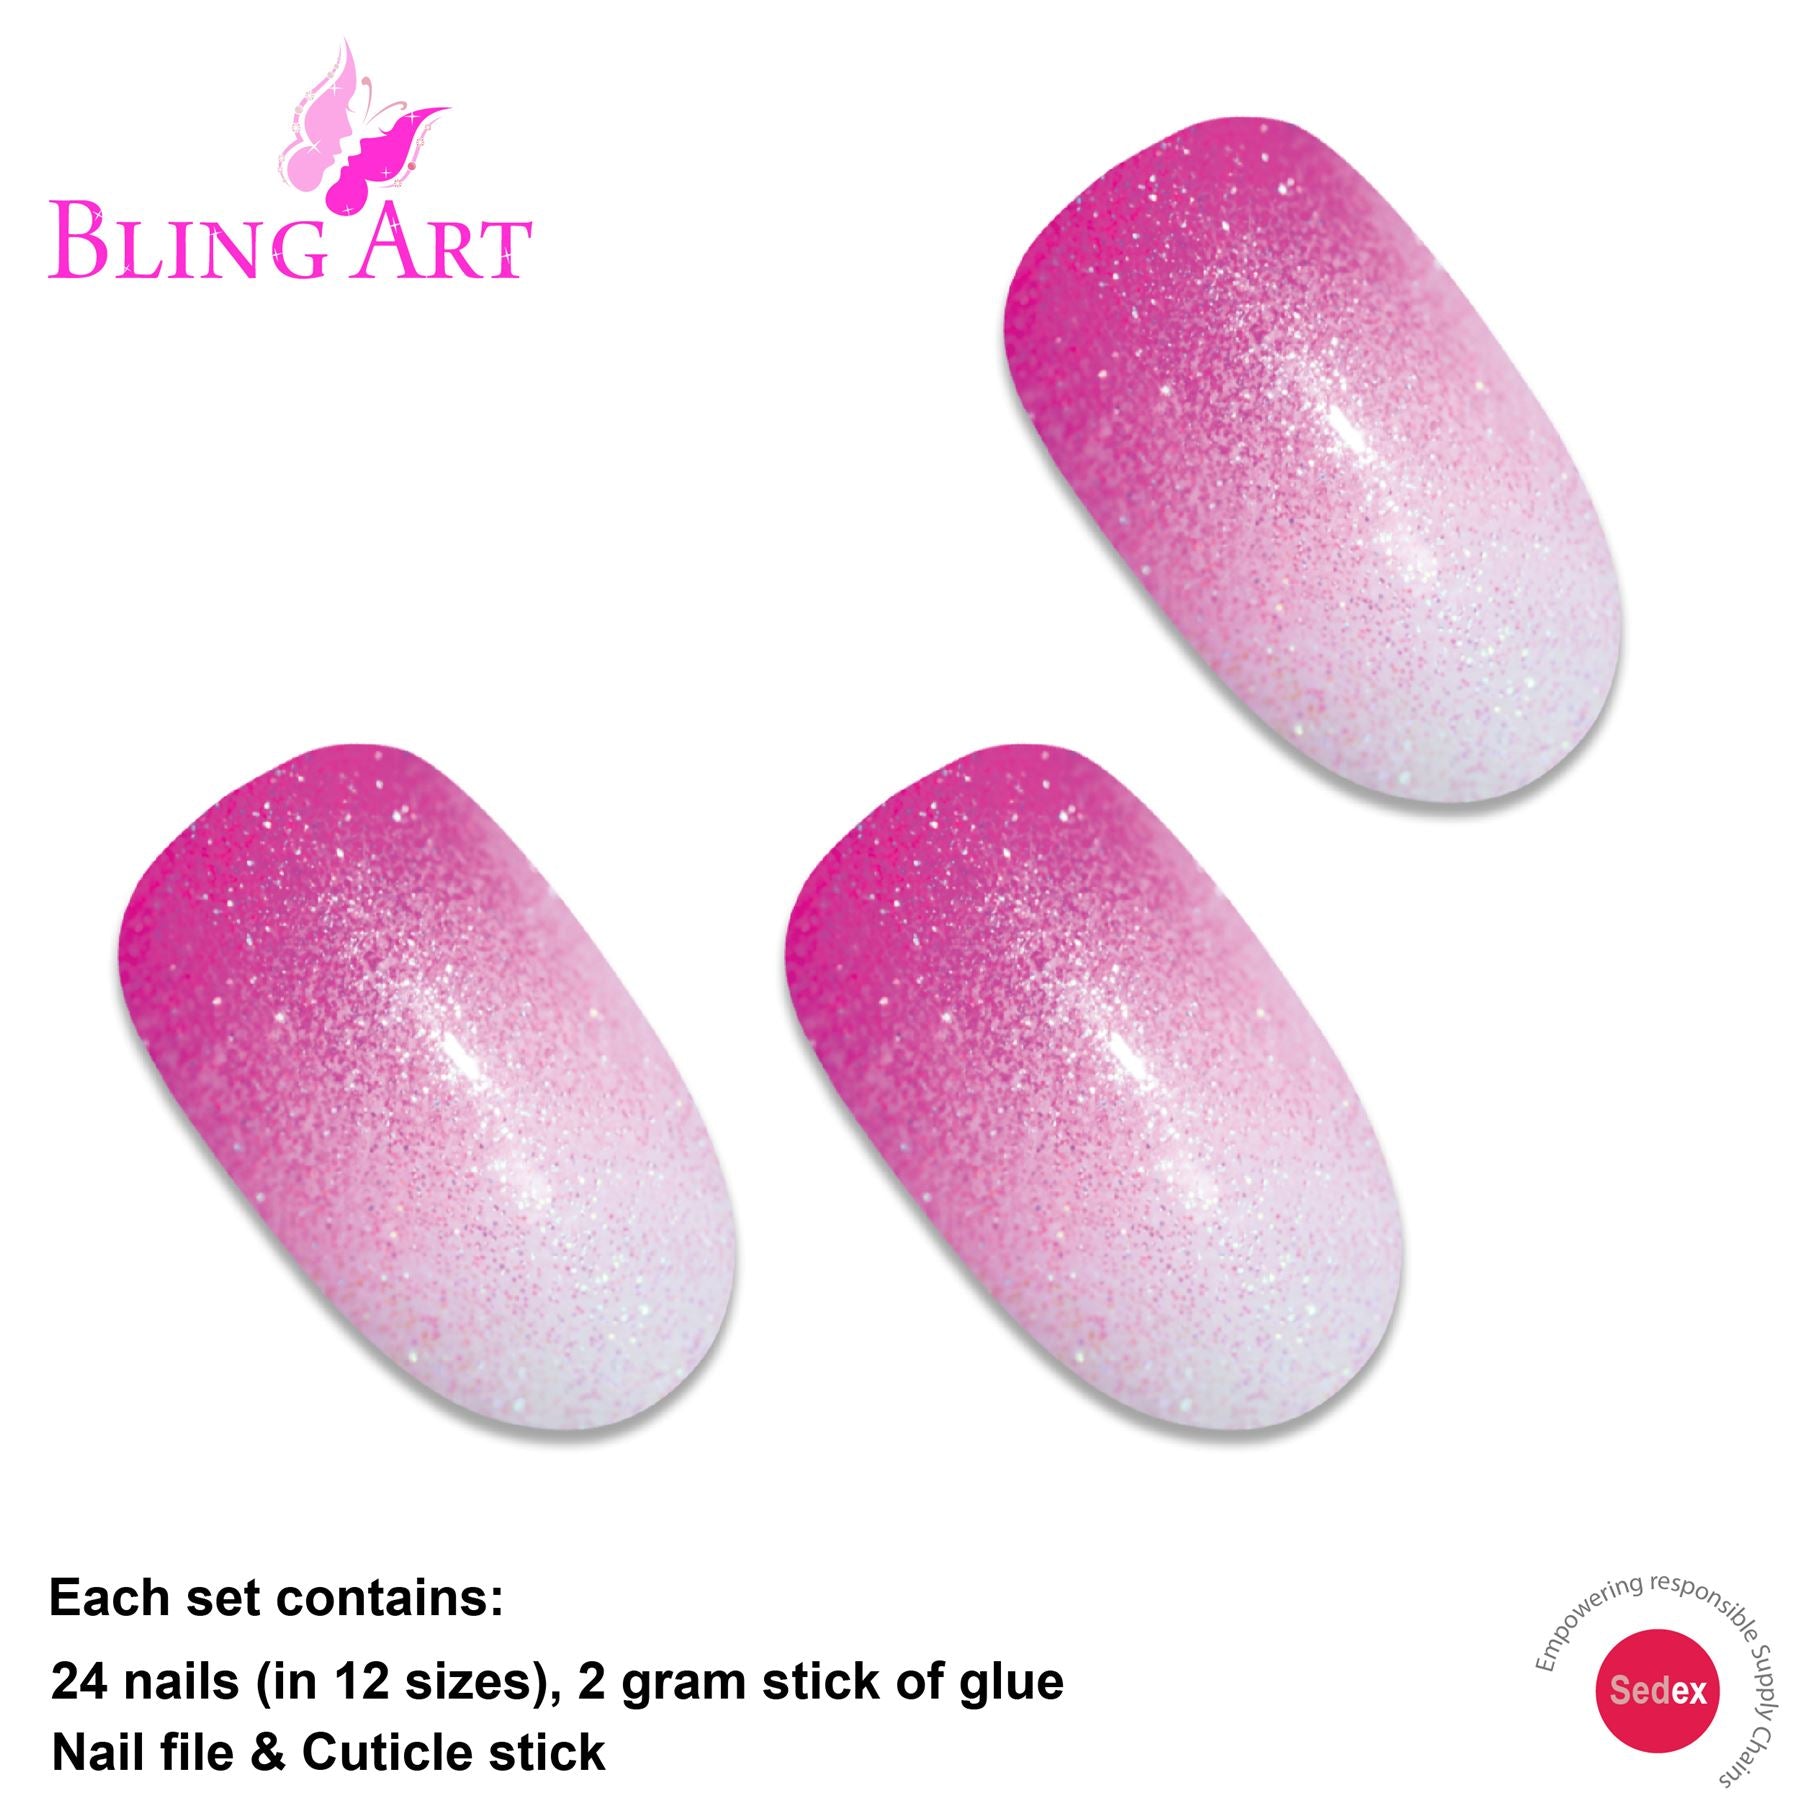 False Nails by Bling Art Pink Gel Ombre Oval Medium Fake Acrylic 24 Tips Glue